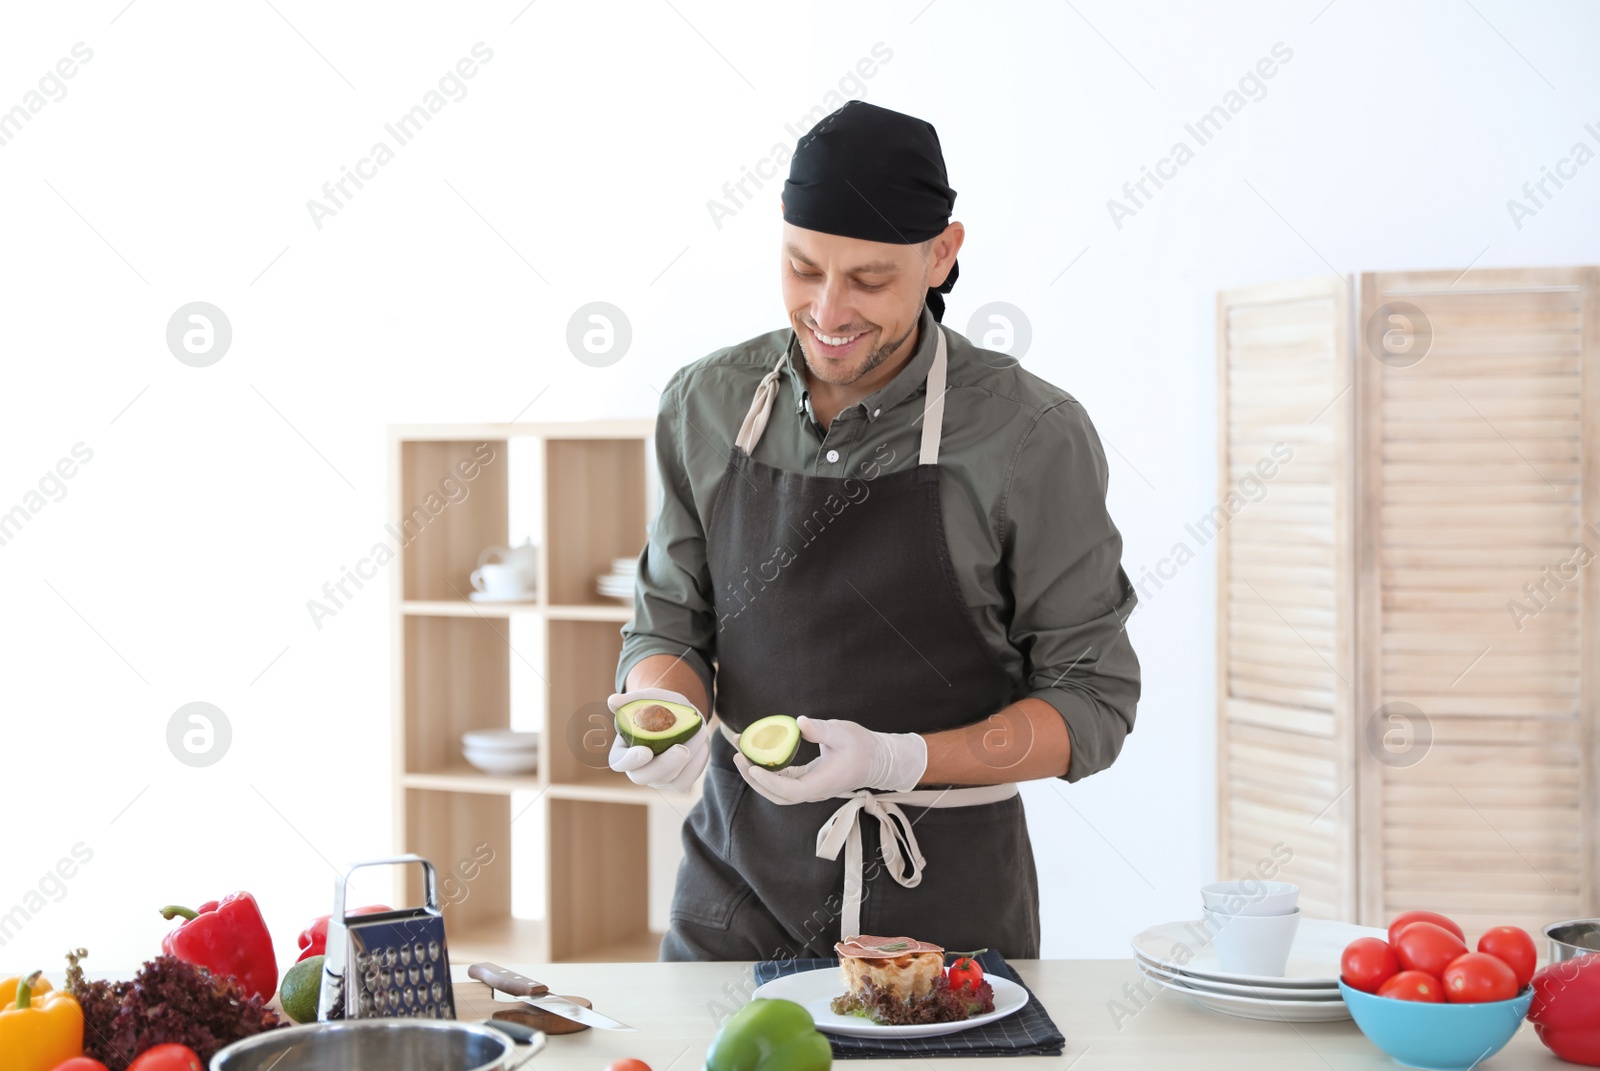 Photo of Professional chef preparing dish on table in kitchen